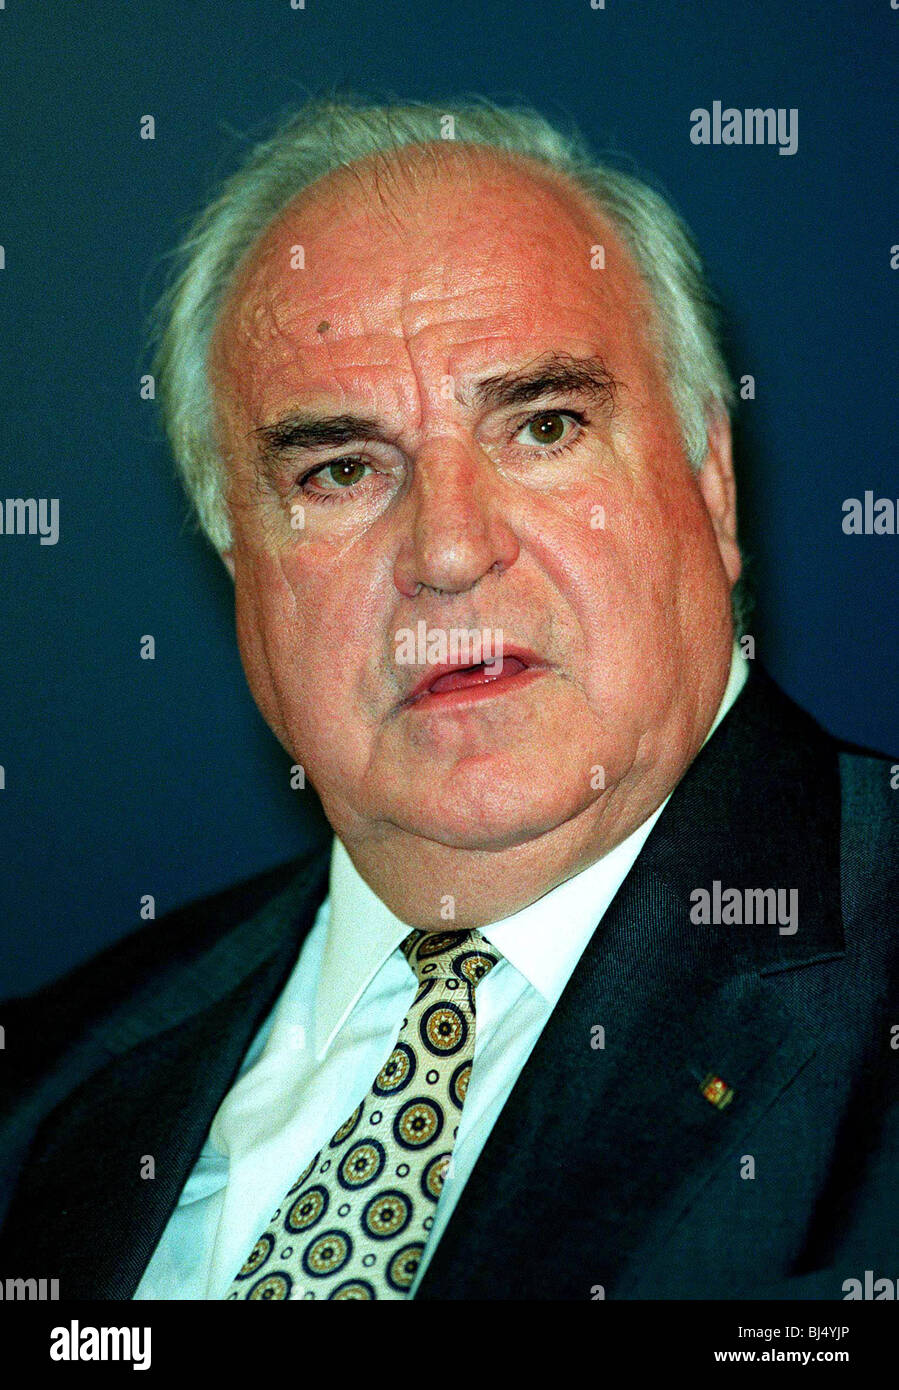 HELMUT KOHL CHANCELLOR OF FEDERAL GERMANY 24 June 1996 Stock Photo - Alamy